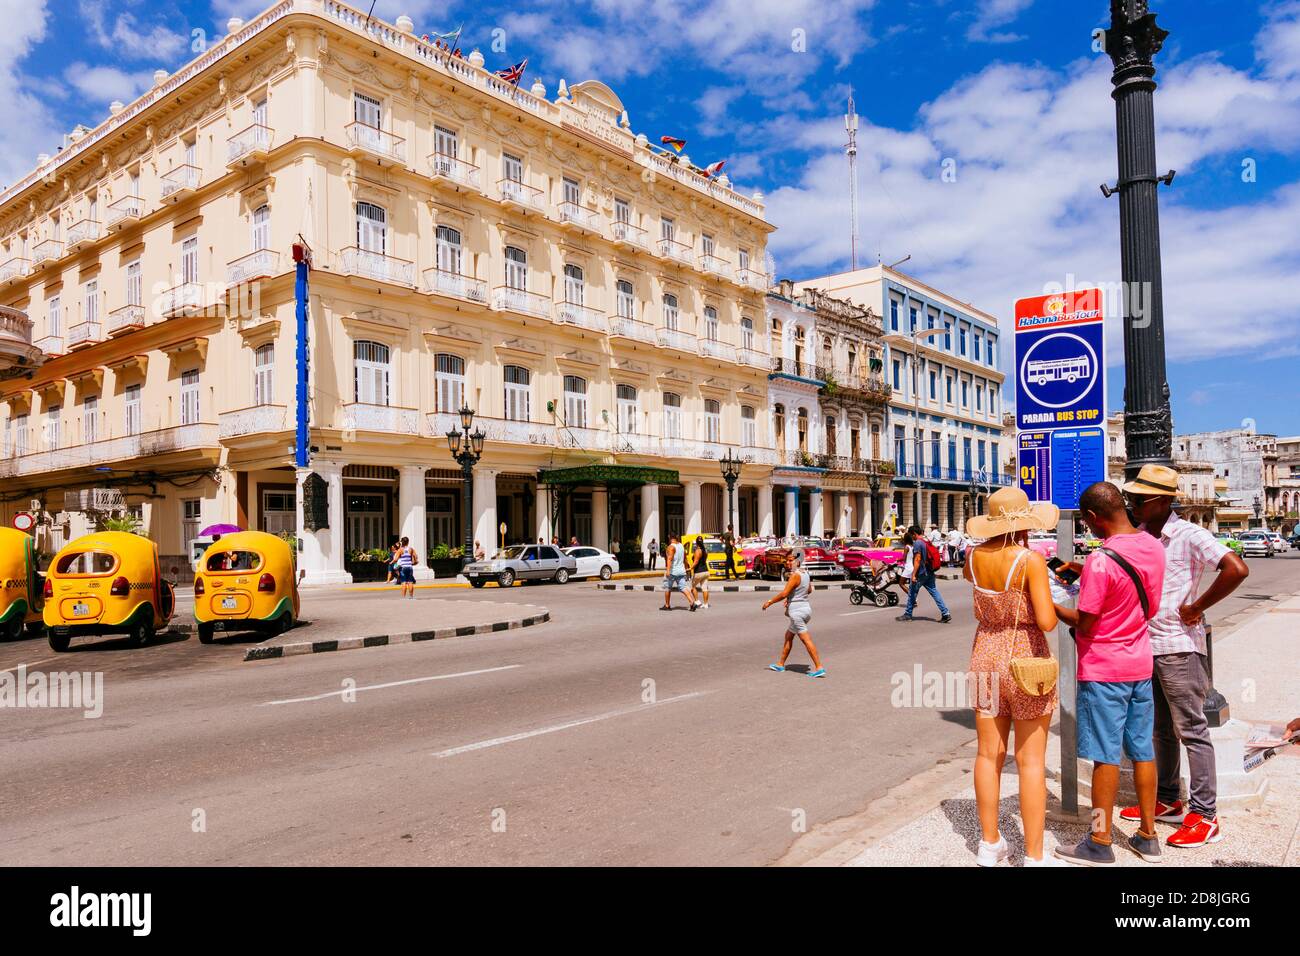 Hotel Inglaterra, with neoclassical architecture dating from 1875, located front Parque Central near Great Theater of Havana. Cuba, Latin America and Stock Photo